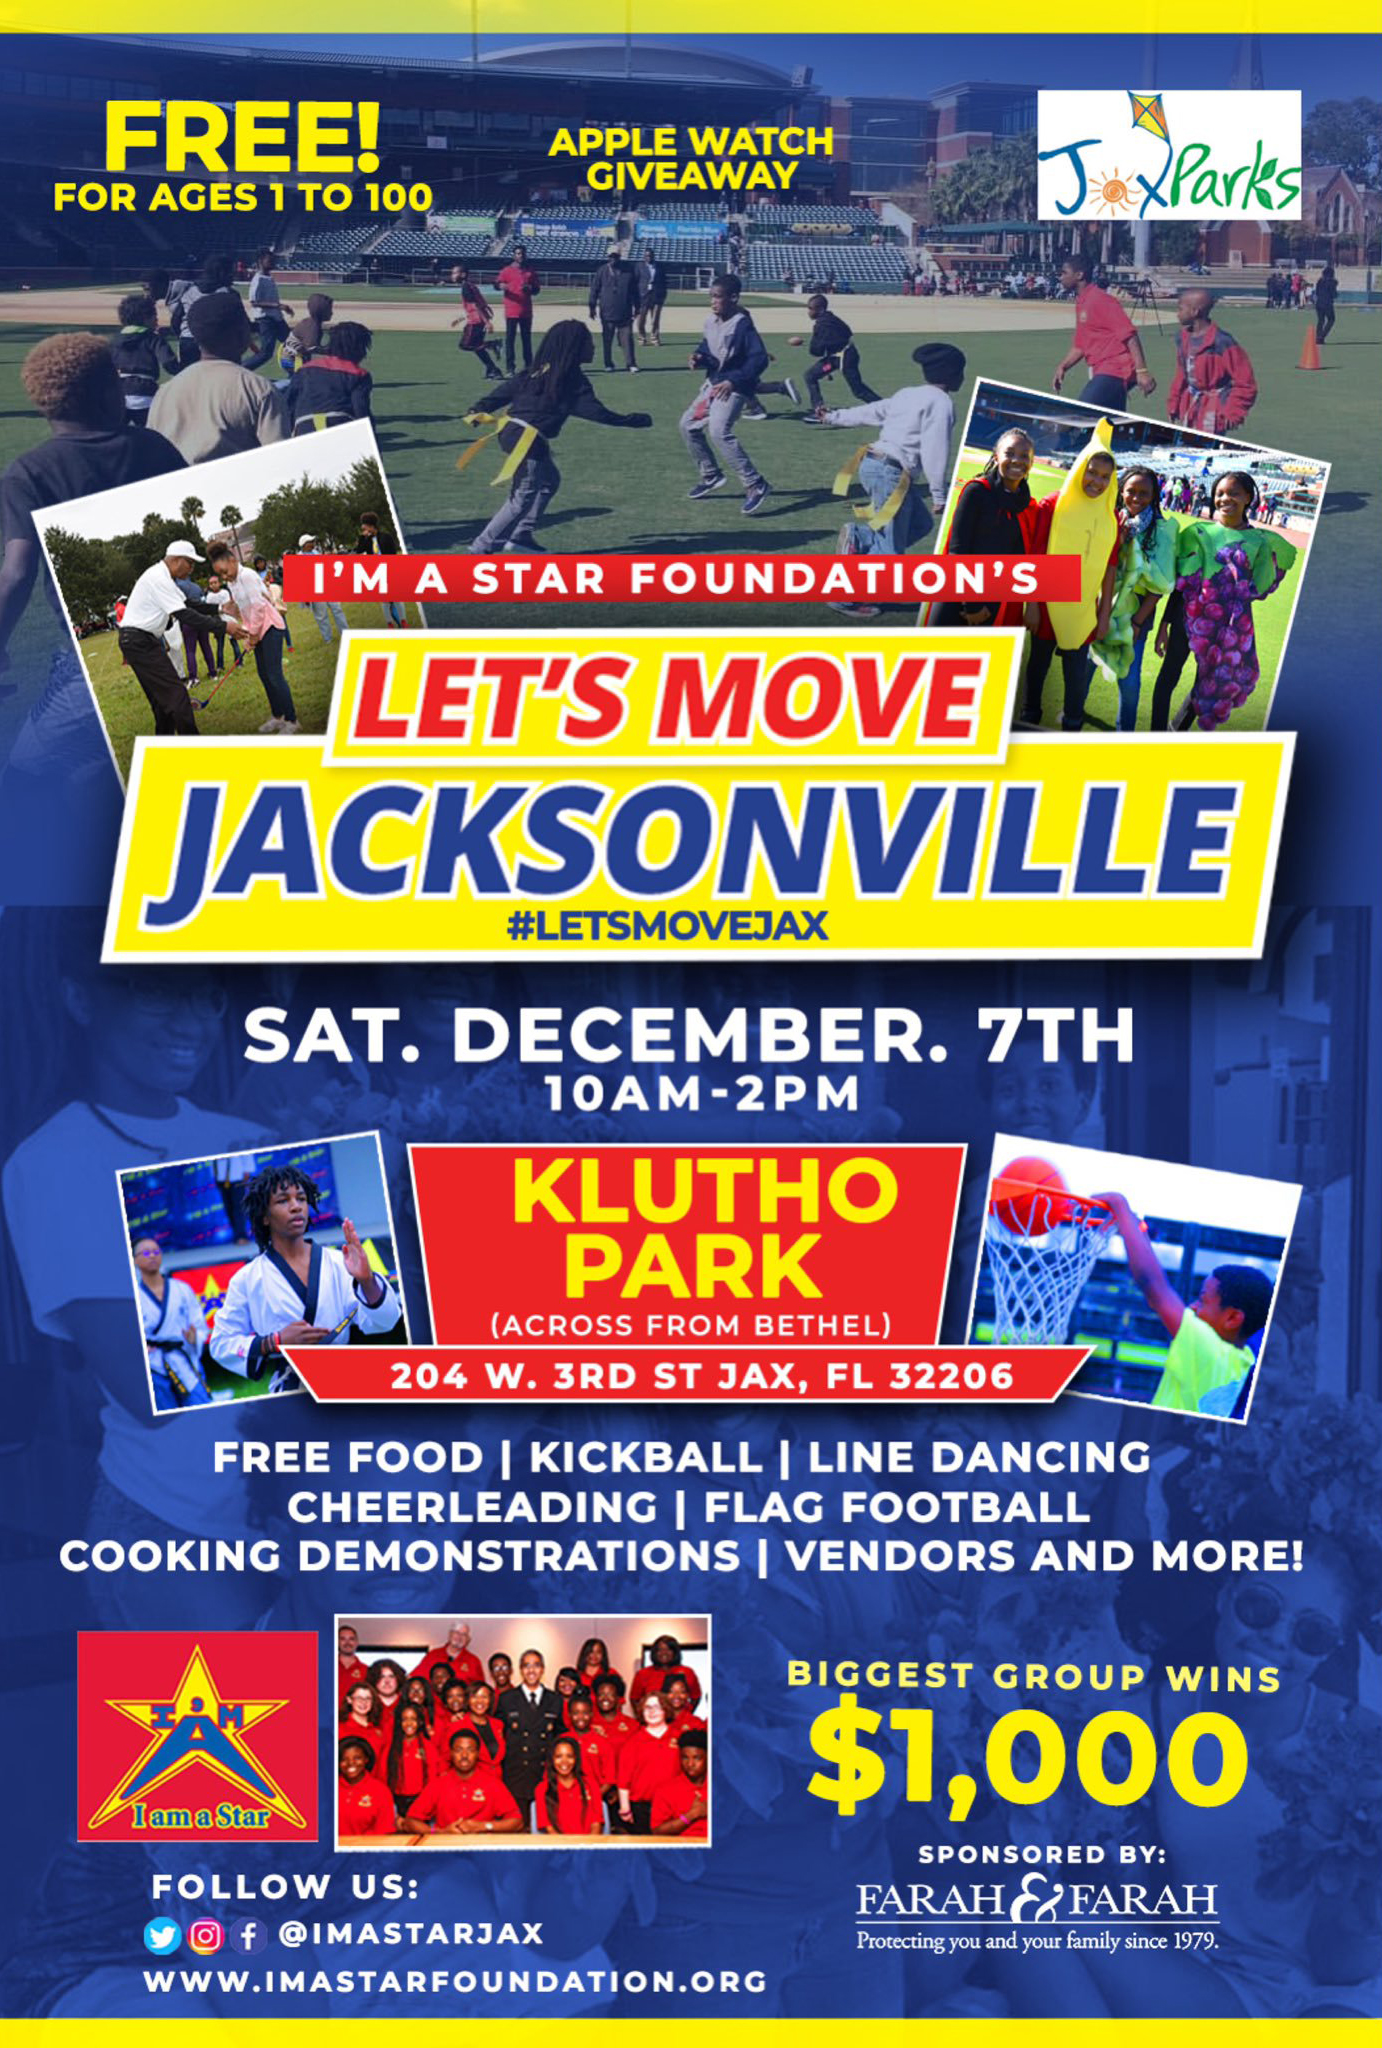 I'm A Star Foundation presents the 9th Annual Let's Move Jacksonville Event